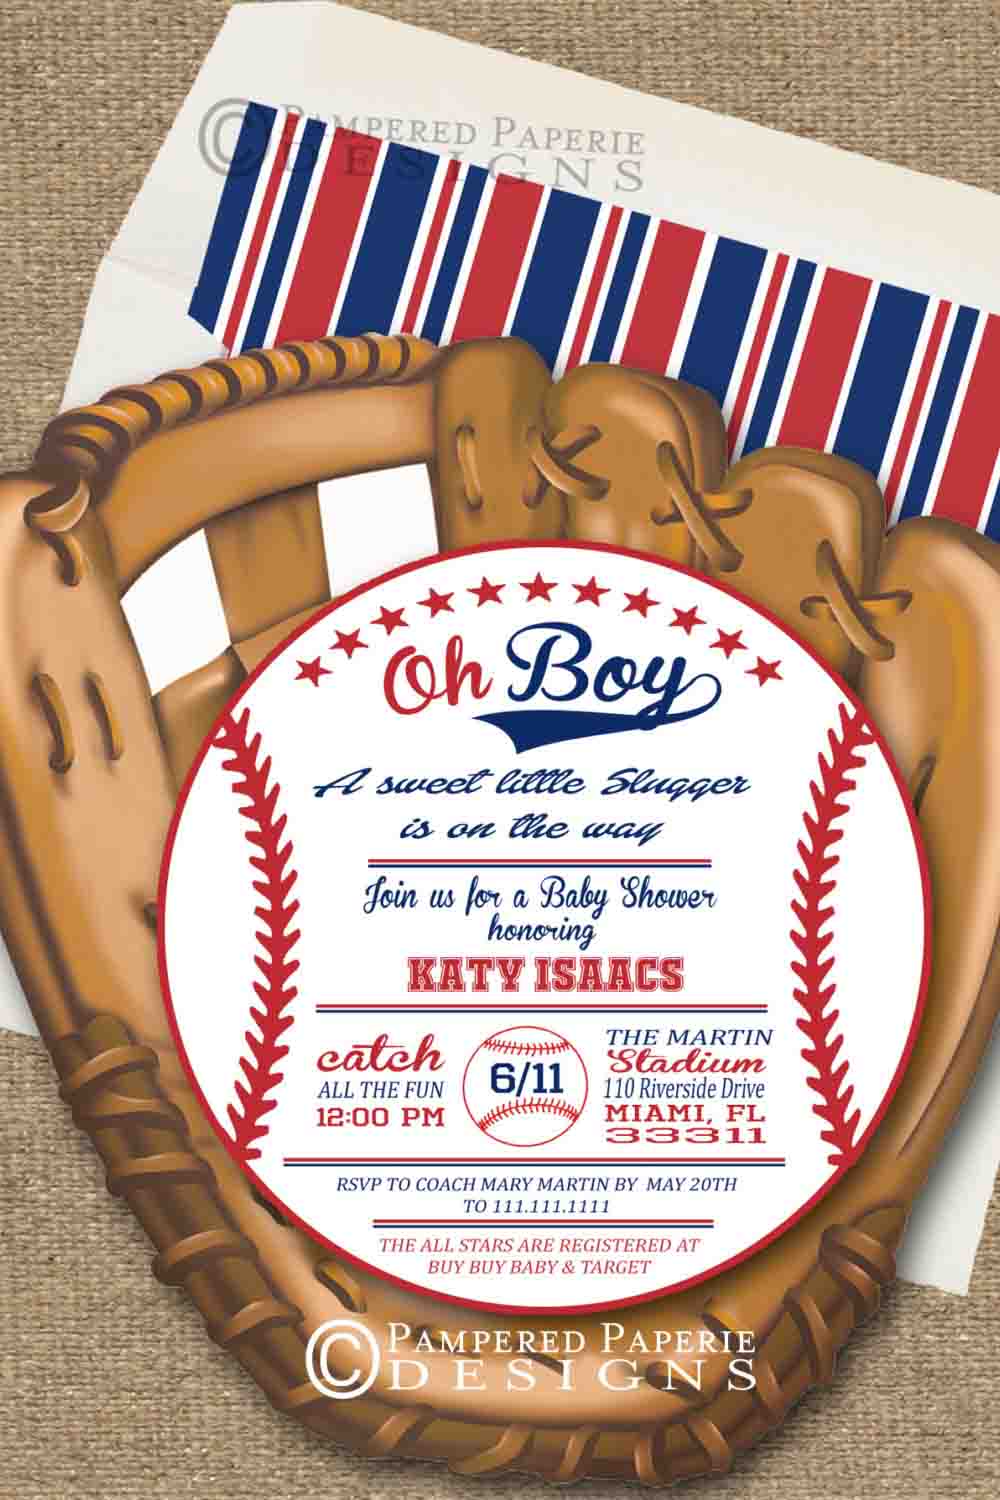 100+ Baseball Party Ideas—by a Professional Party Planner